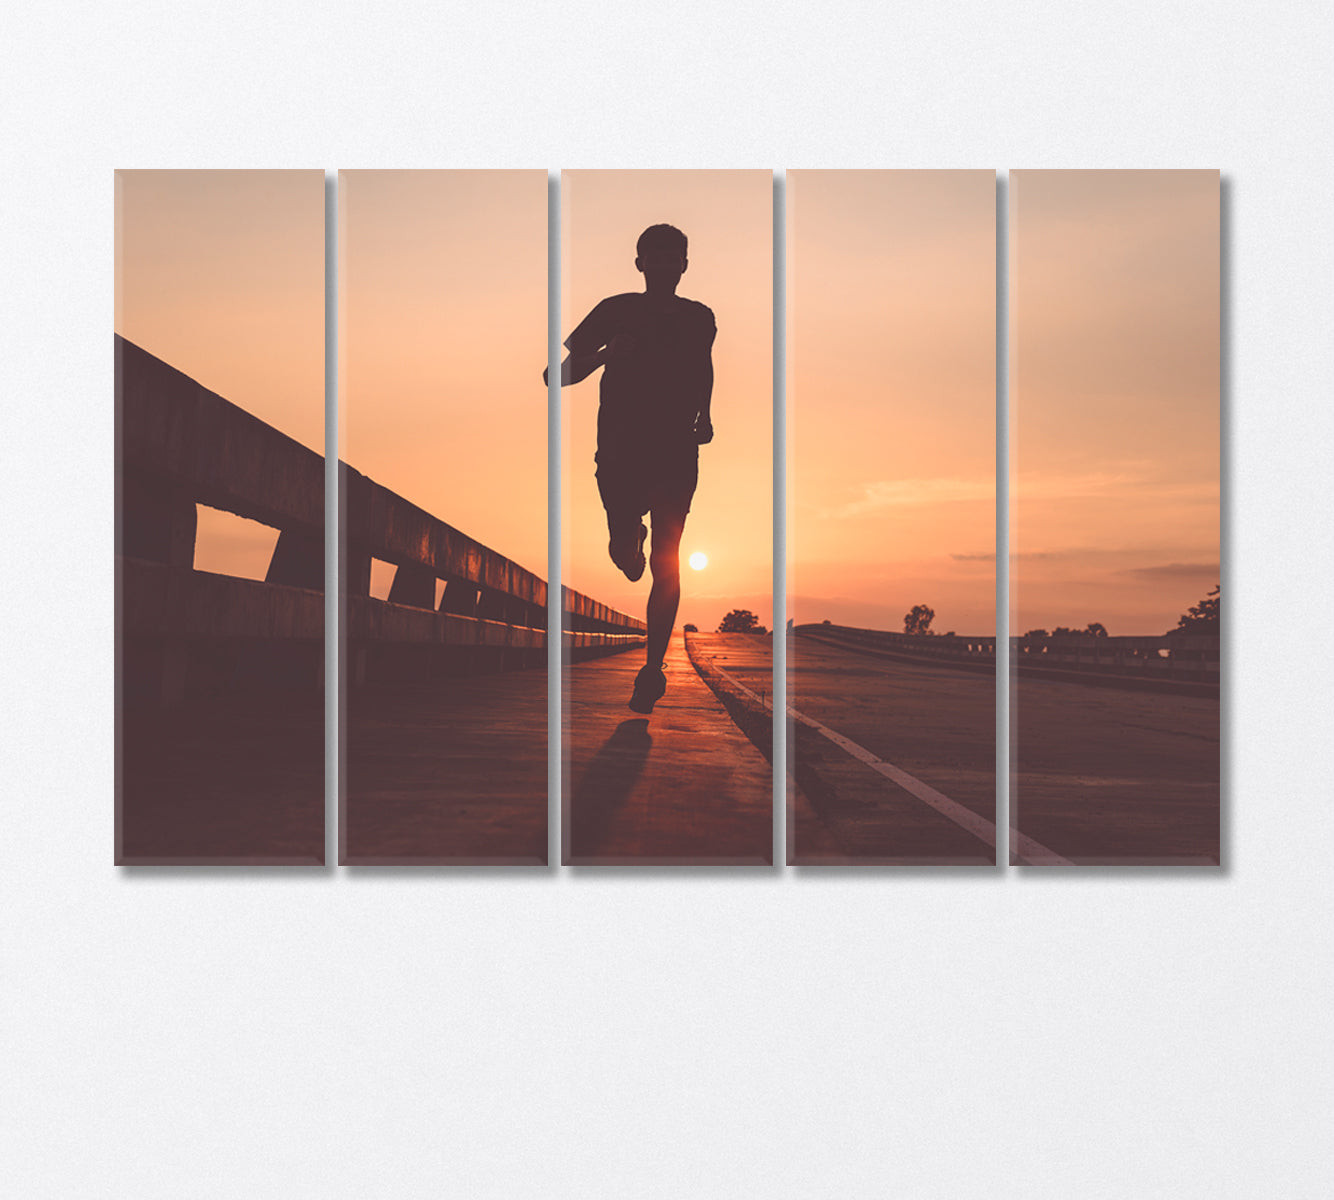 Running Athlete Outdoors in Sunset Canvas Print-Canvas Print-CetArt-5 Panels-36x24 inches-CetArt